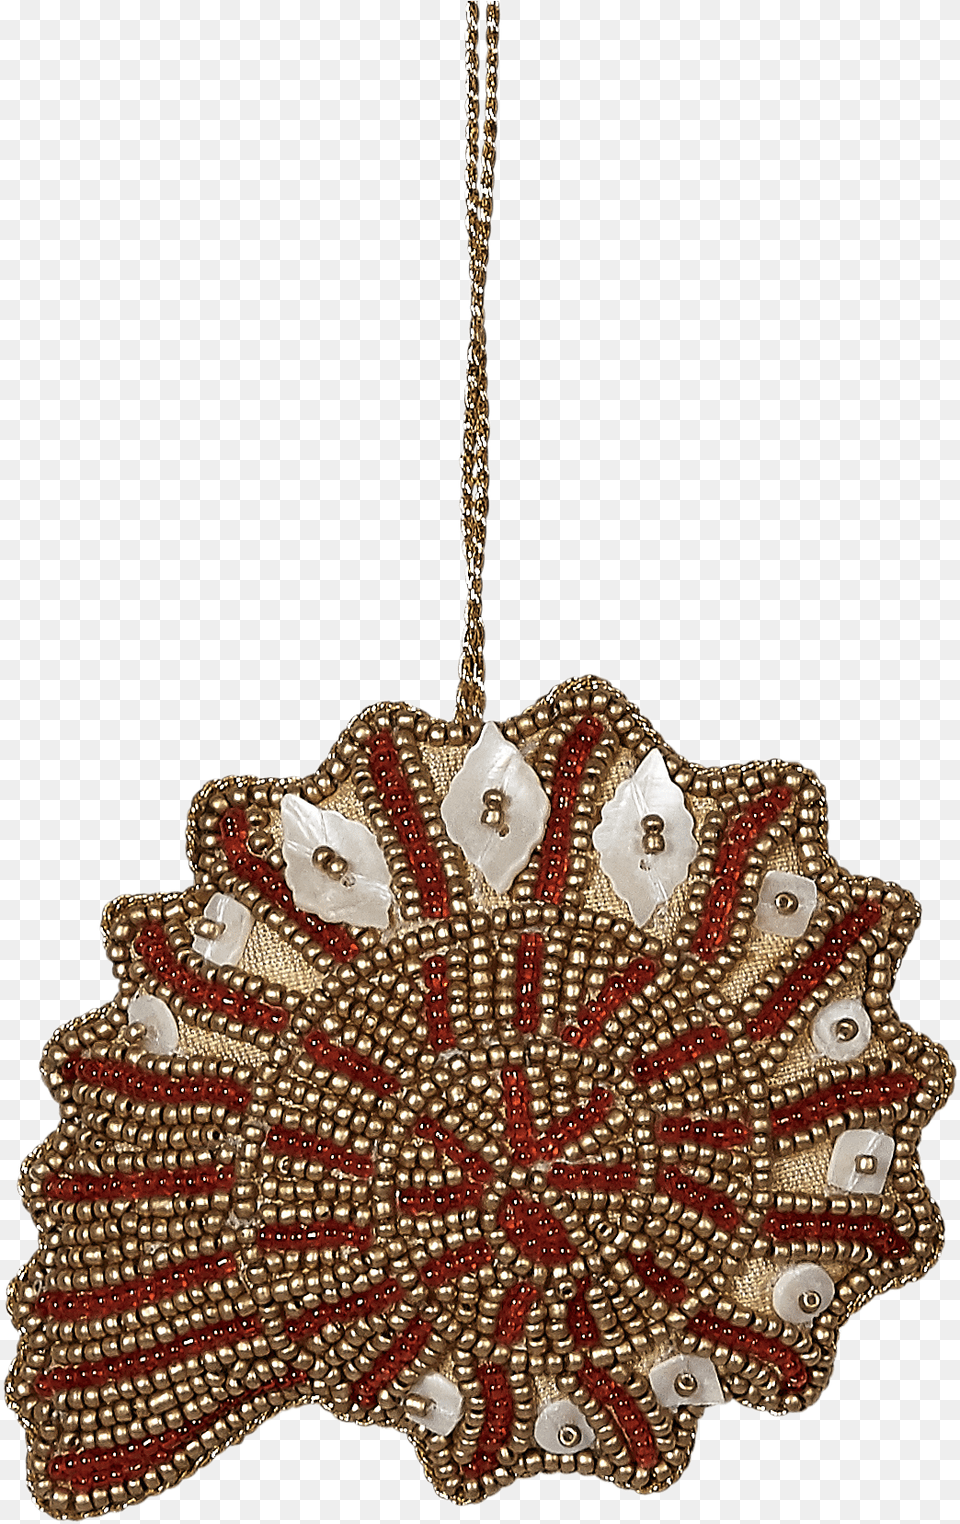 Bead And Mother Of Pearl Ornament Chain, Accessories, Jewelry, Necklace, Chandelier Png Image